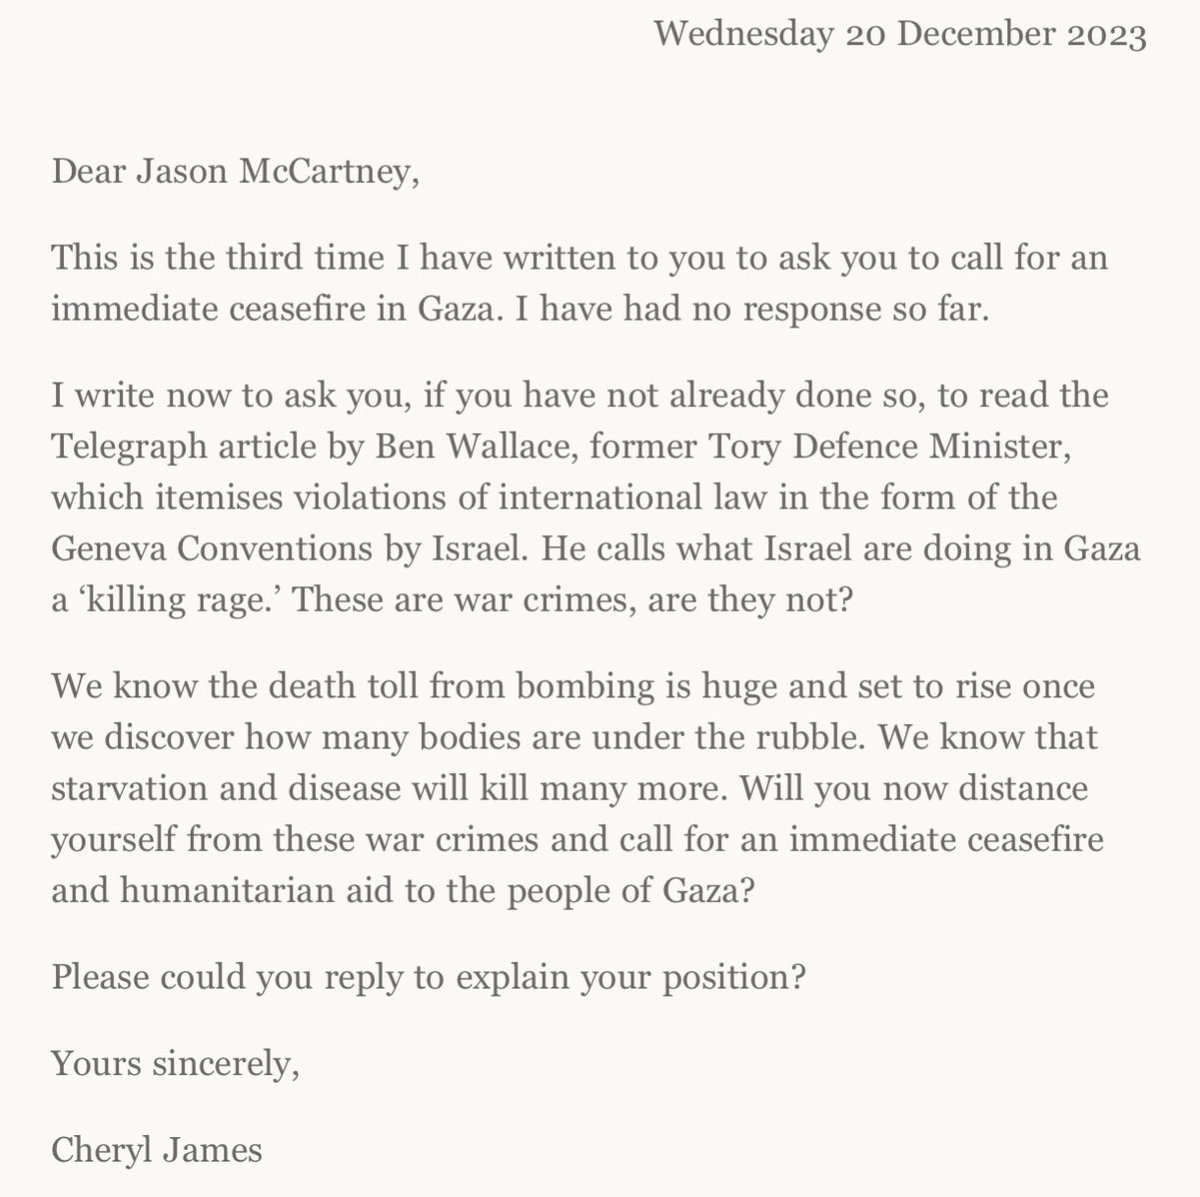 Third letter to my MP, asking for him to call for a ceasefire in Gaza. Still awaiting a response.